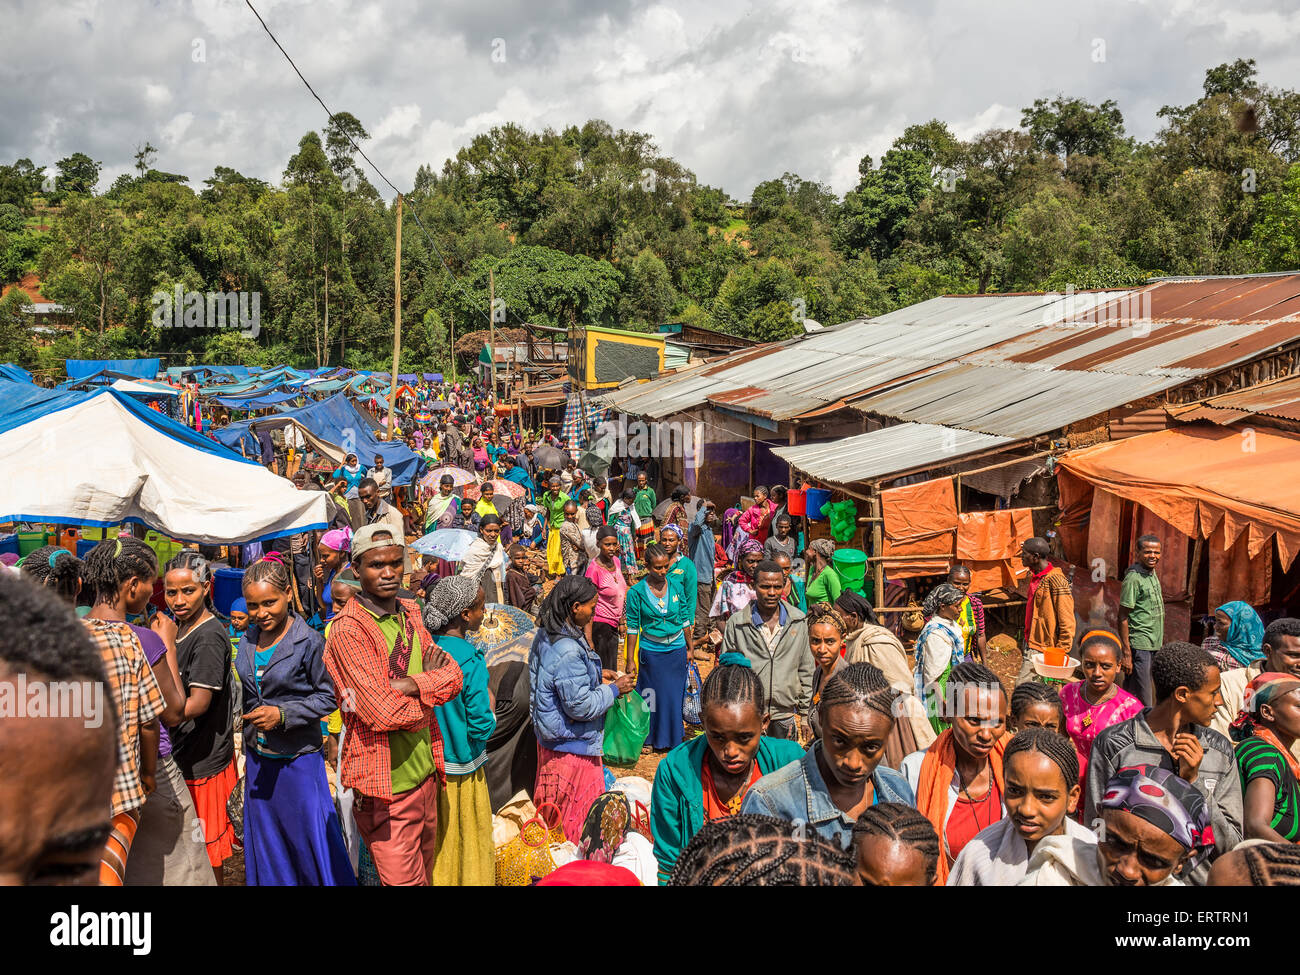 Popular and crowded african market in Jimma, Ethiopia with many  people buying and selling. Stock Photo